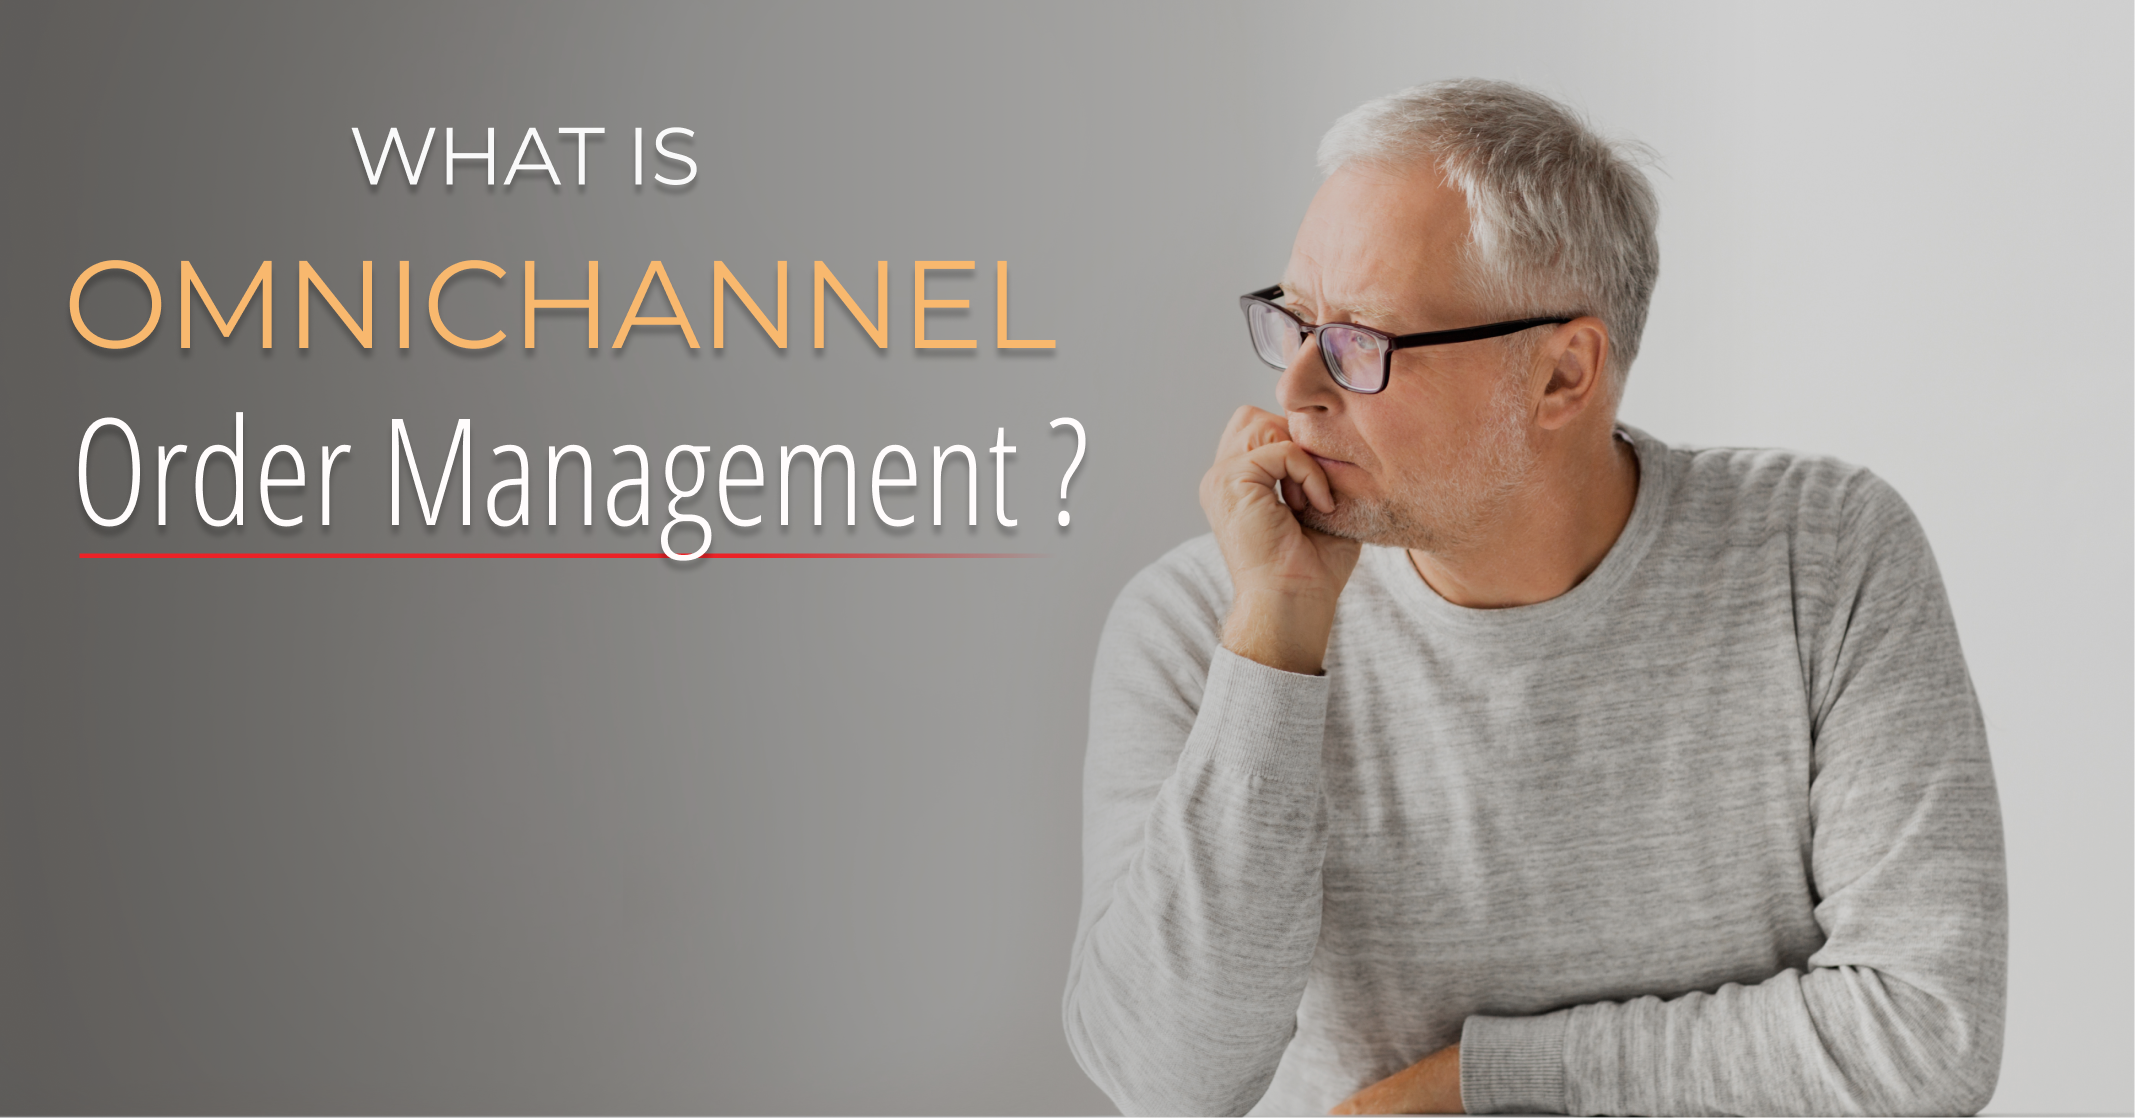 What Is Omnichannel Order Management & Why Does It Exist?